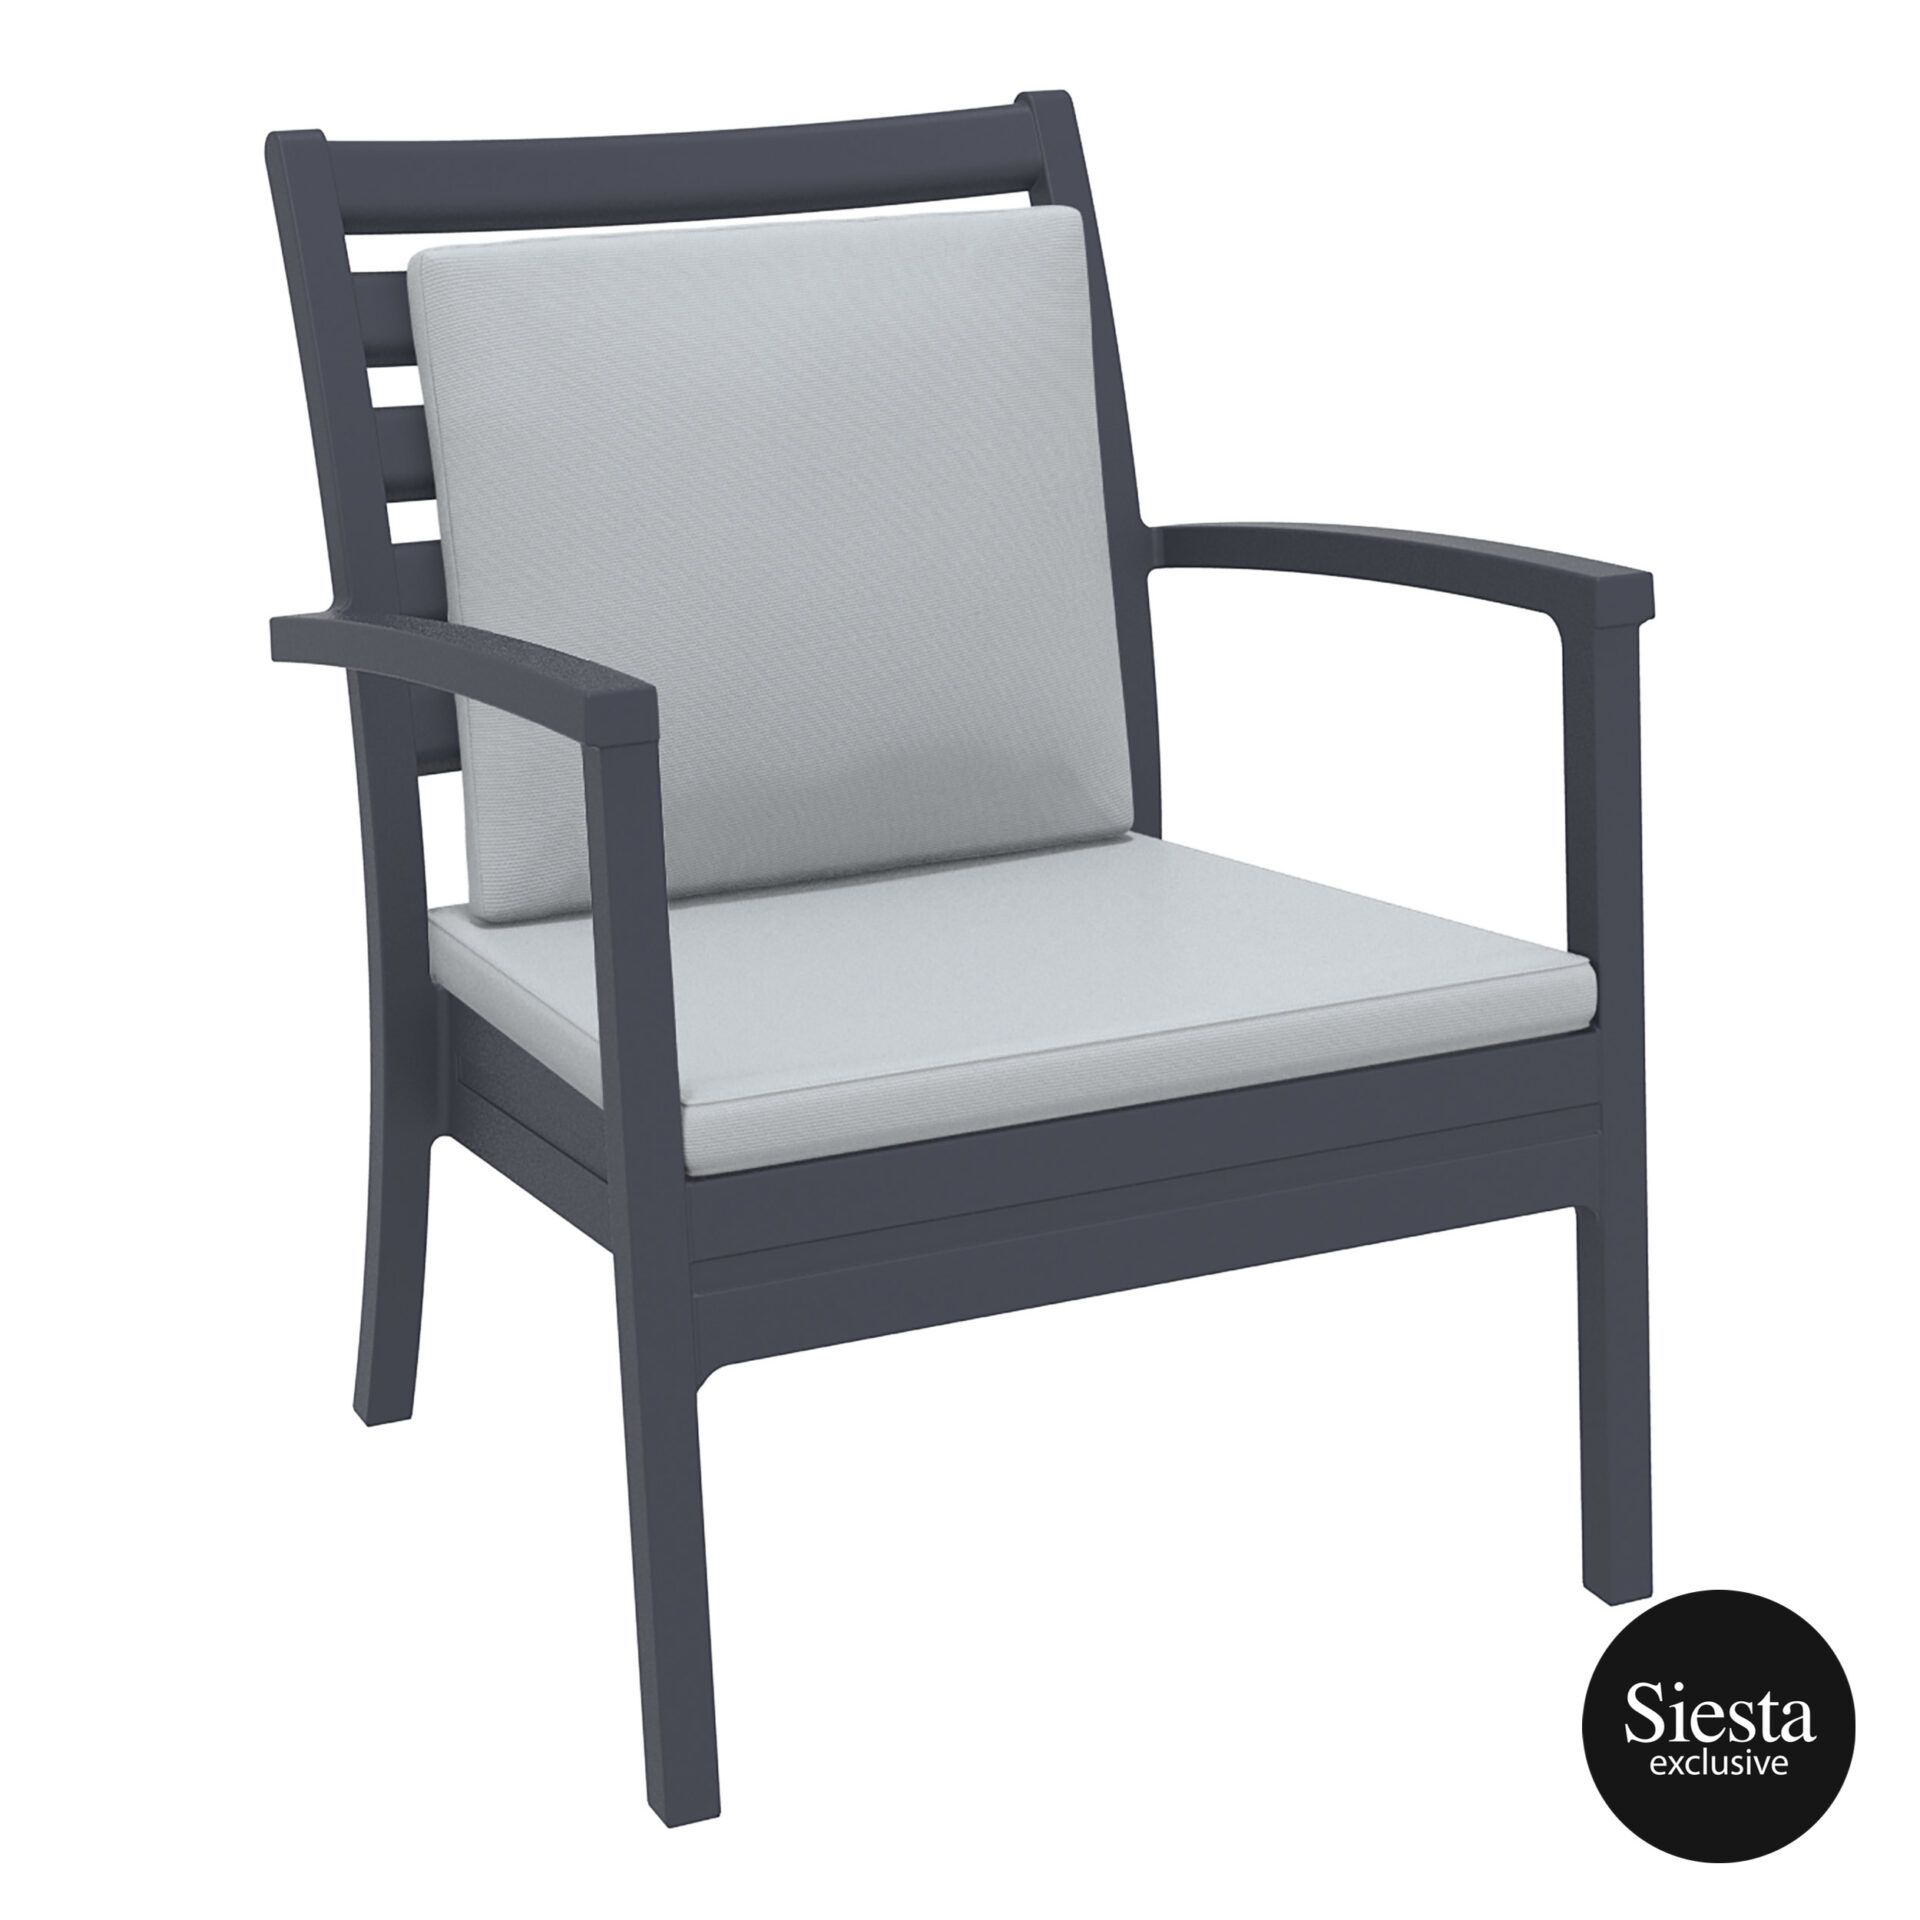 Artemis XL Armchair - Anthracite with Light Grey Seat and Back Cushion